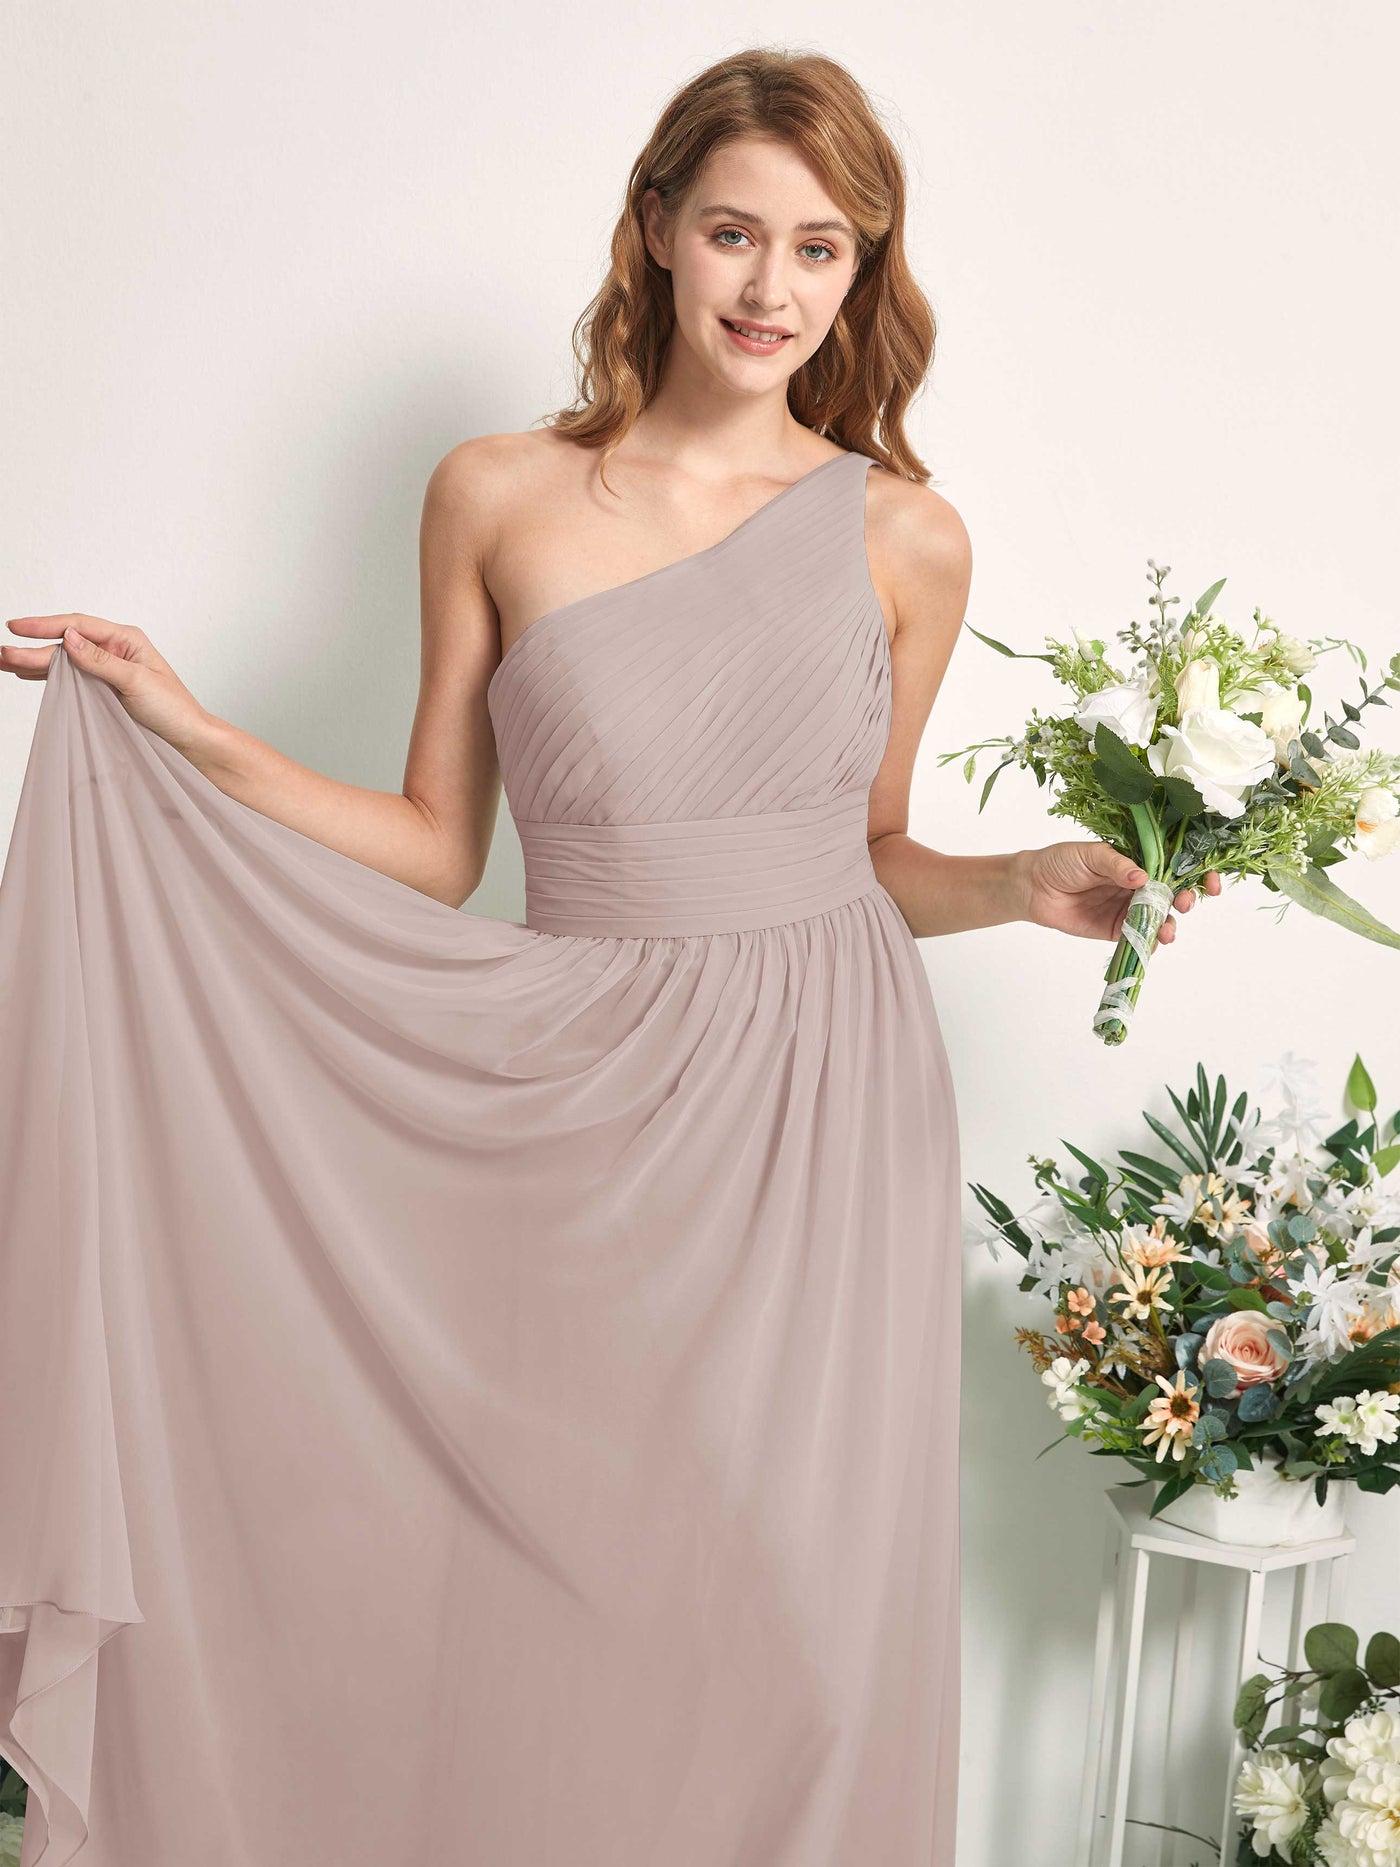 Bridesmaid Dress A-line Chiffon One Shoulder Full Length Sleeveless Wedding Party Dress - Taupe (81226724)#color_taupe